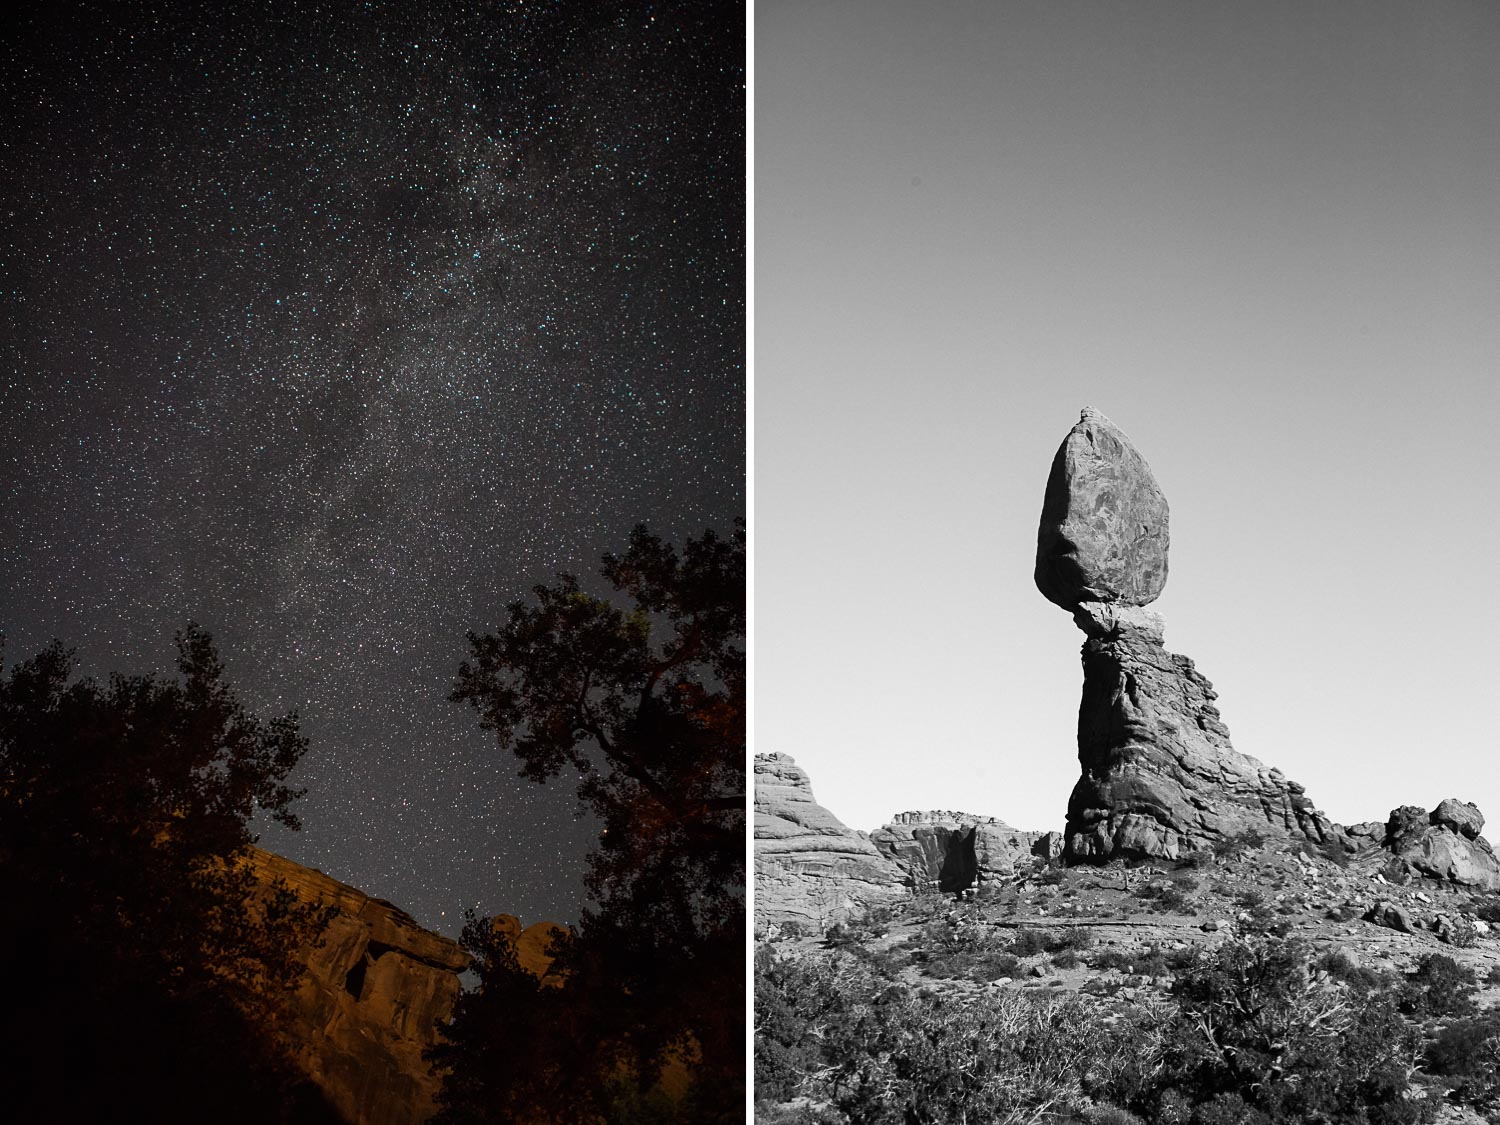 Stars over Utah and Balanced Rock in Arches National Park